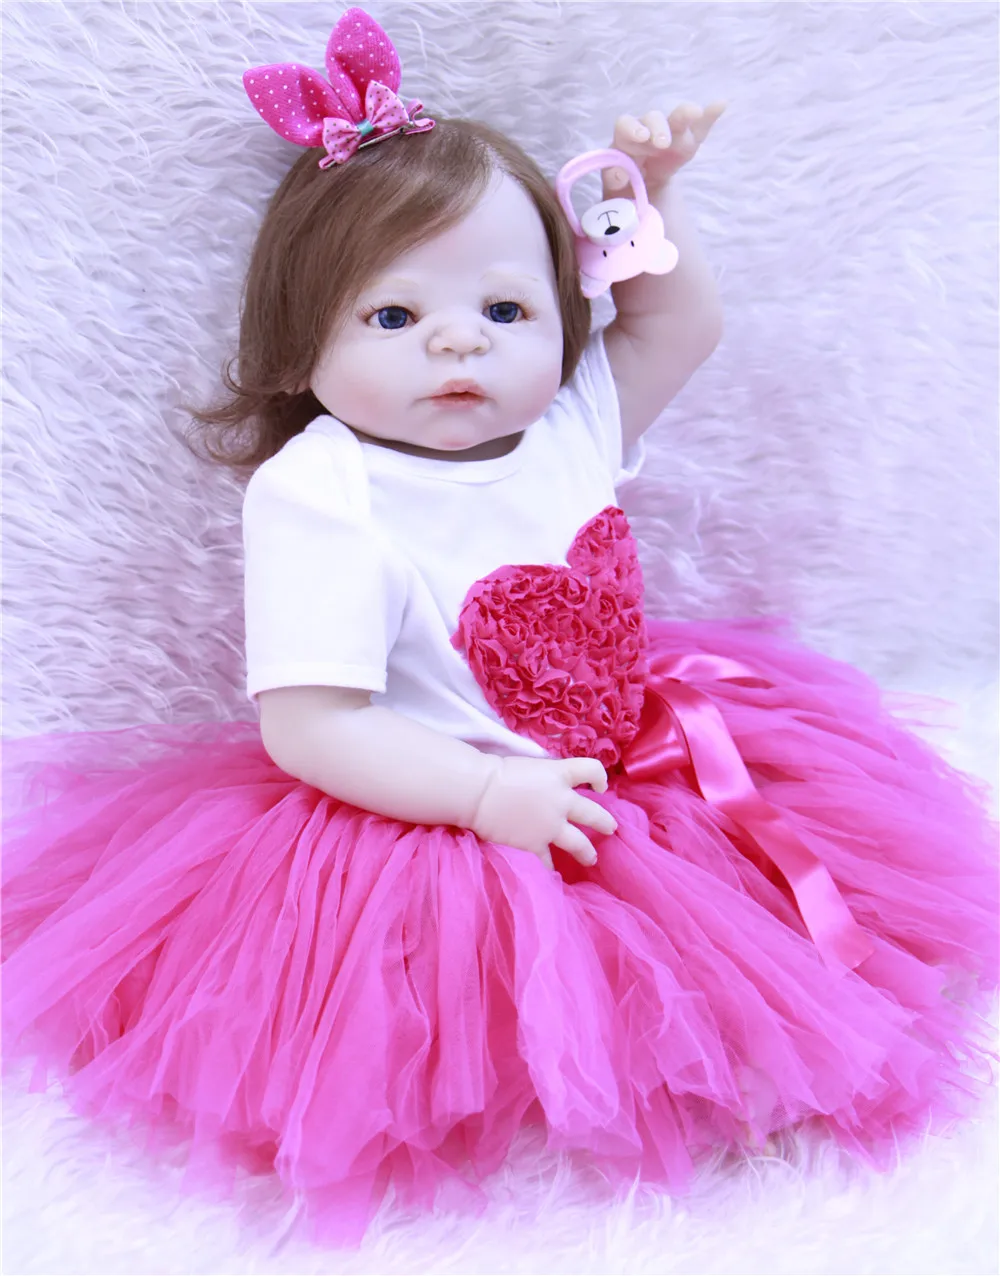 

23" Full Silicone Reborn Girl Baby Doll Toy Lifelike handmade modeling infant dolls baby Child play house bonecas for sale